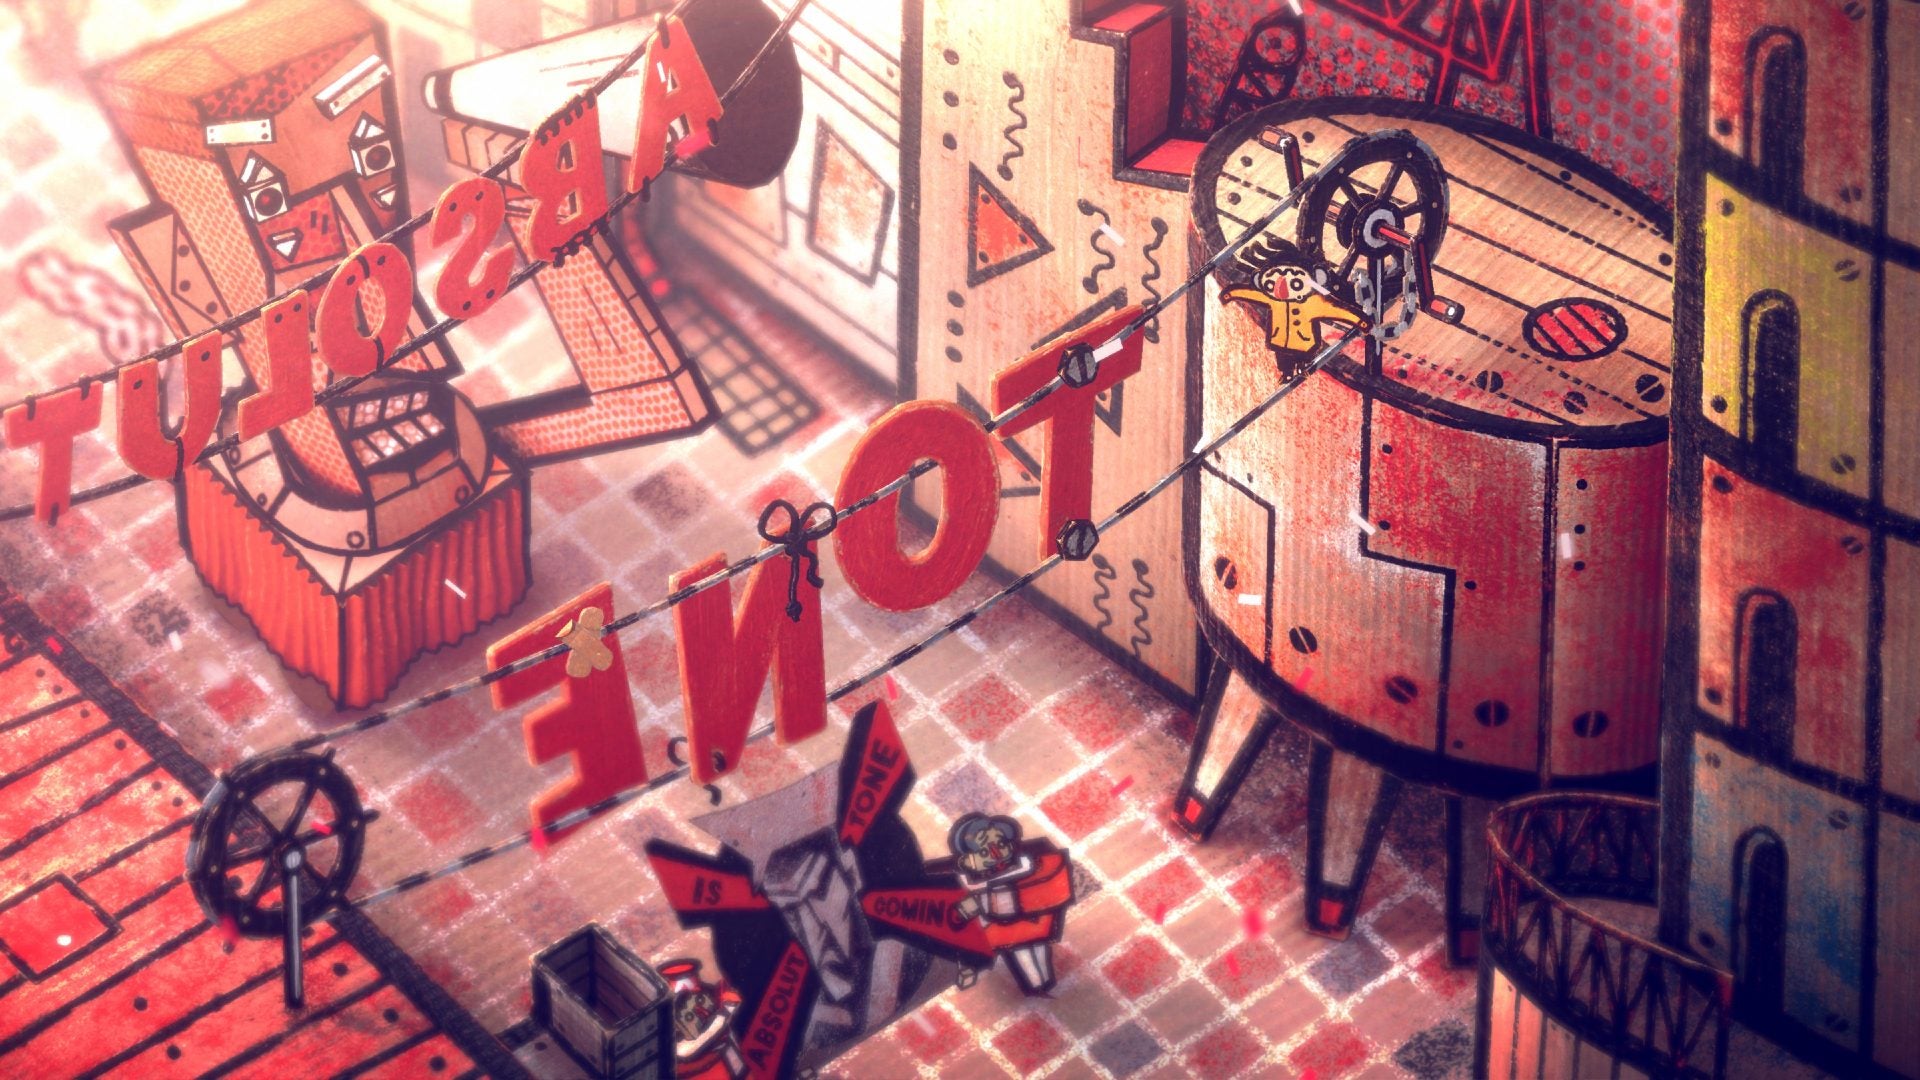 Phonopolis is a dystopian adventure game from Czech collective Amanita Design.